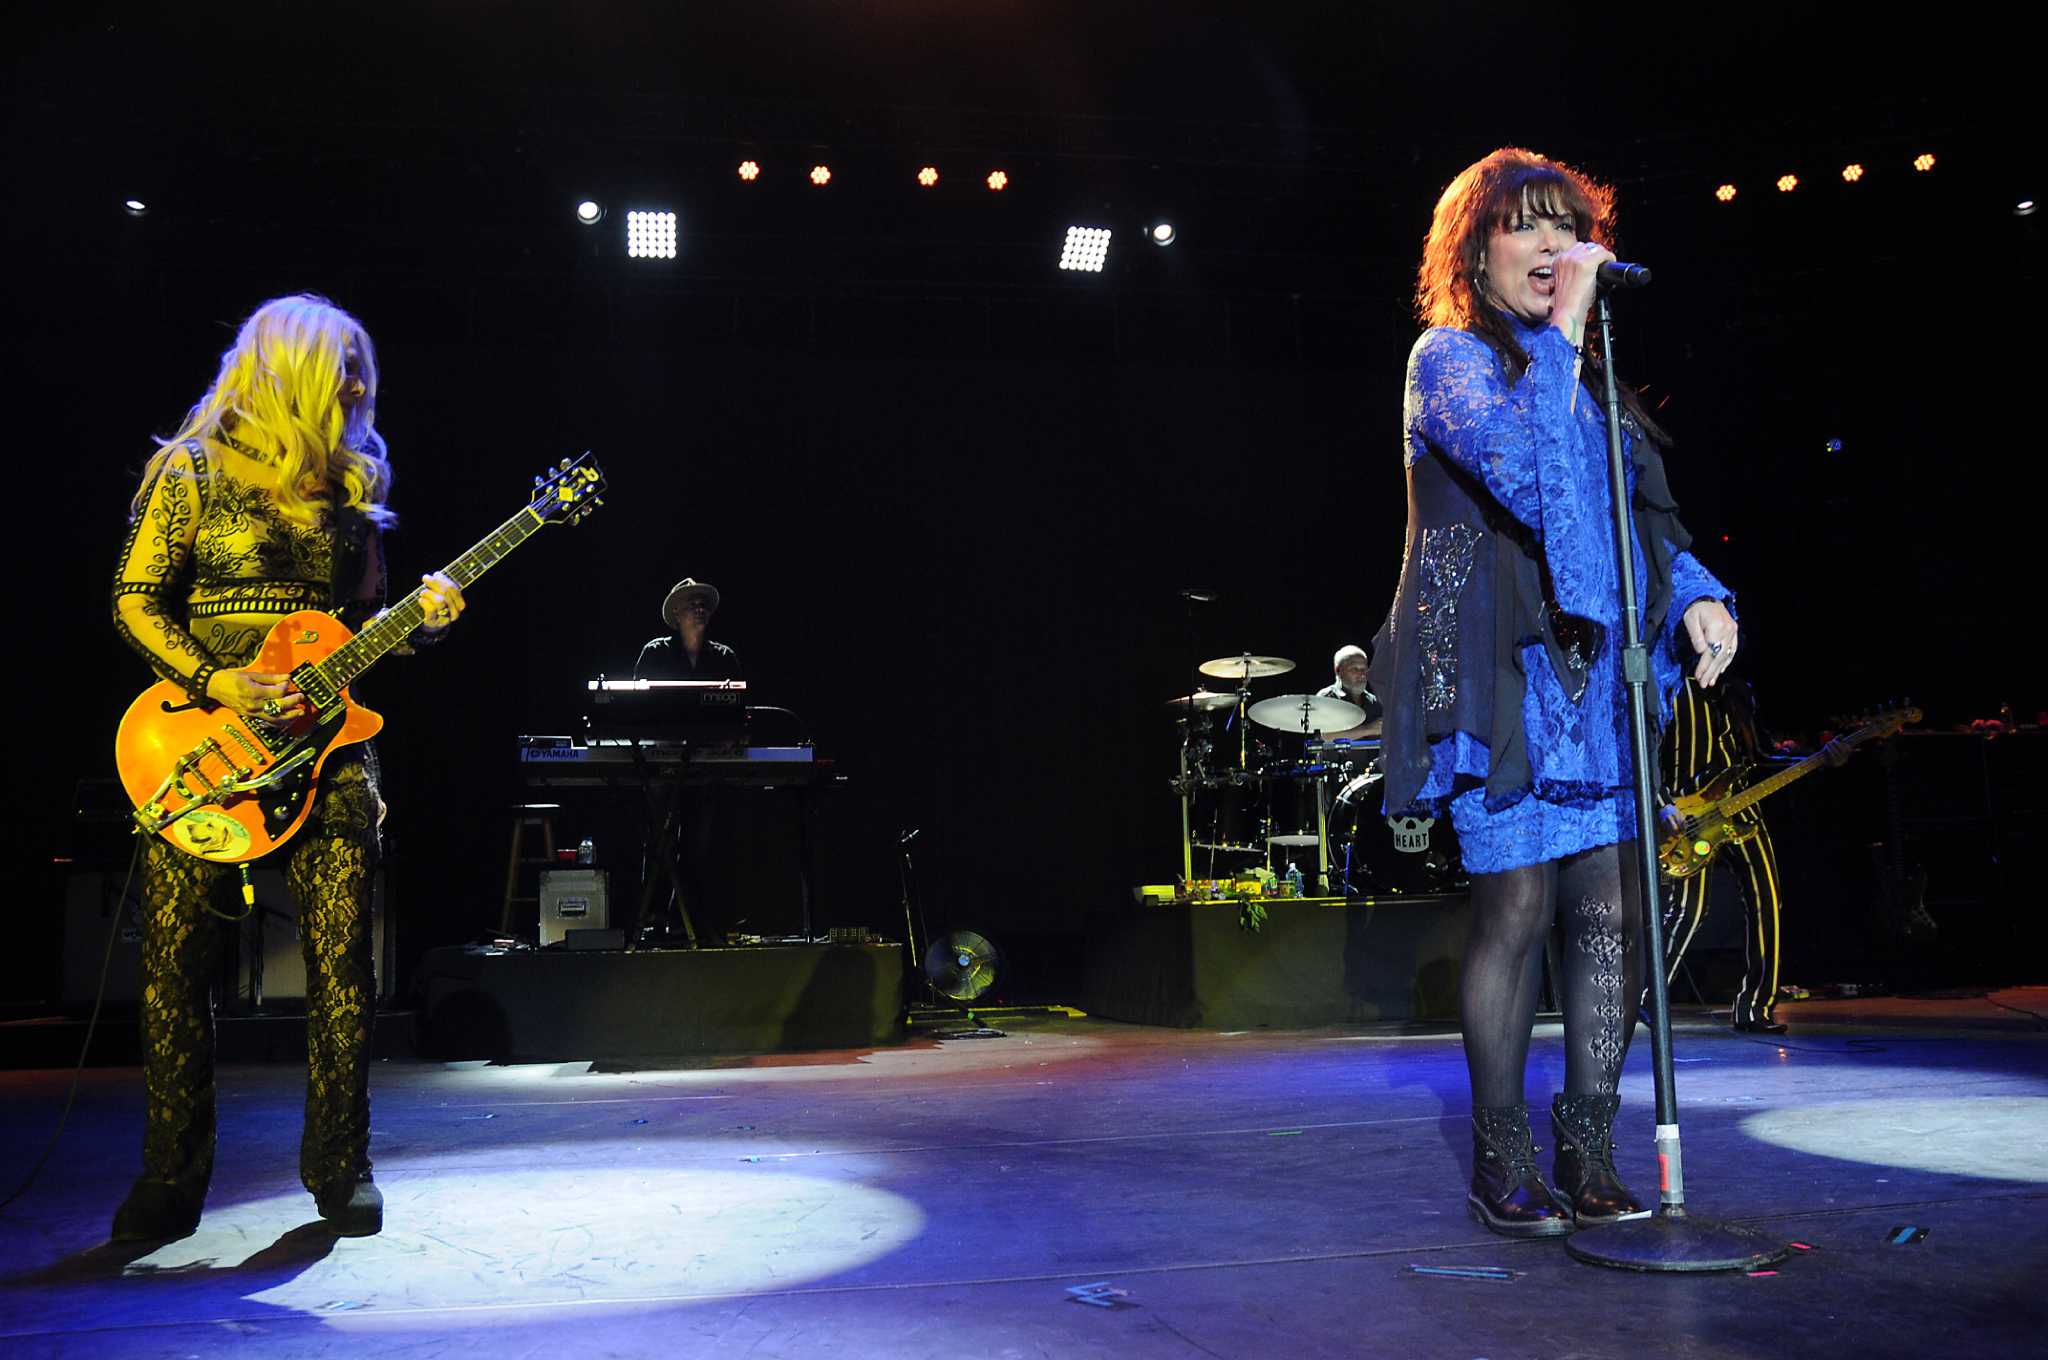 Rock band Heart returns to the road after three years with Love Alive tour - Houston ...